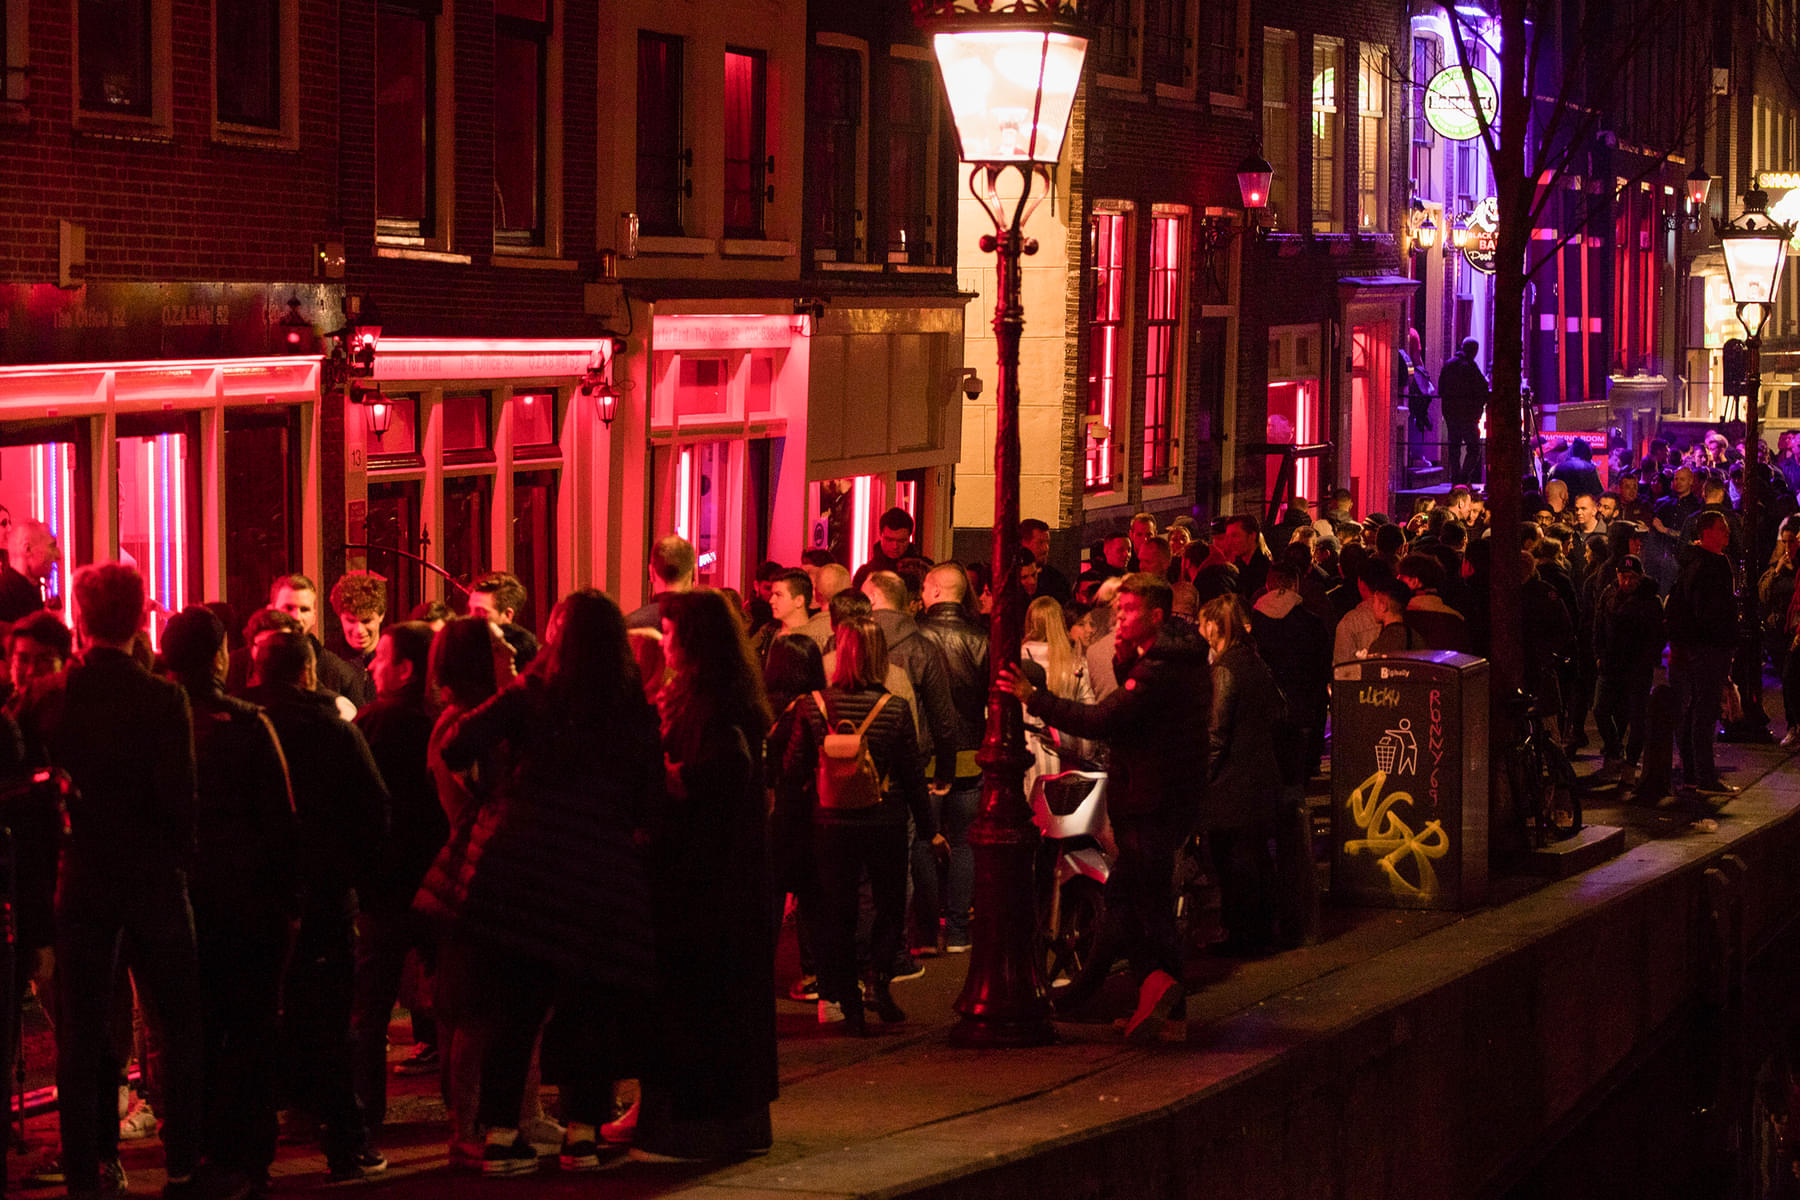 Explore the nightlife of Red Light District of Amsterdam